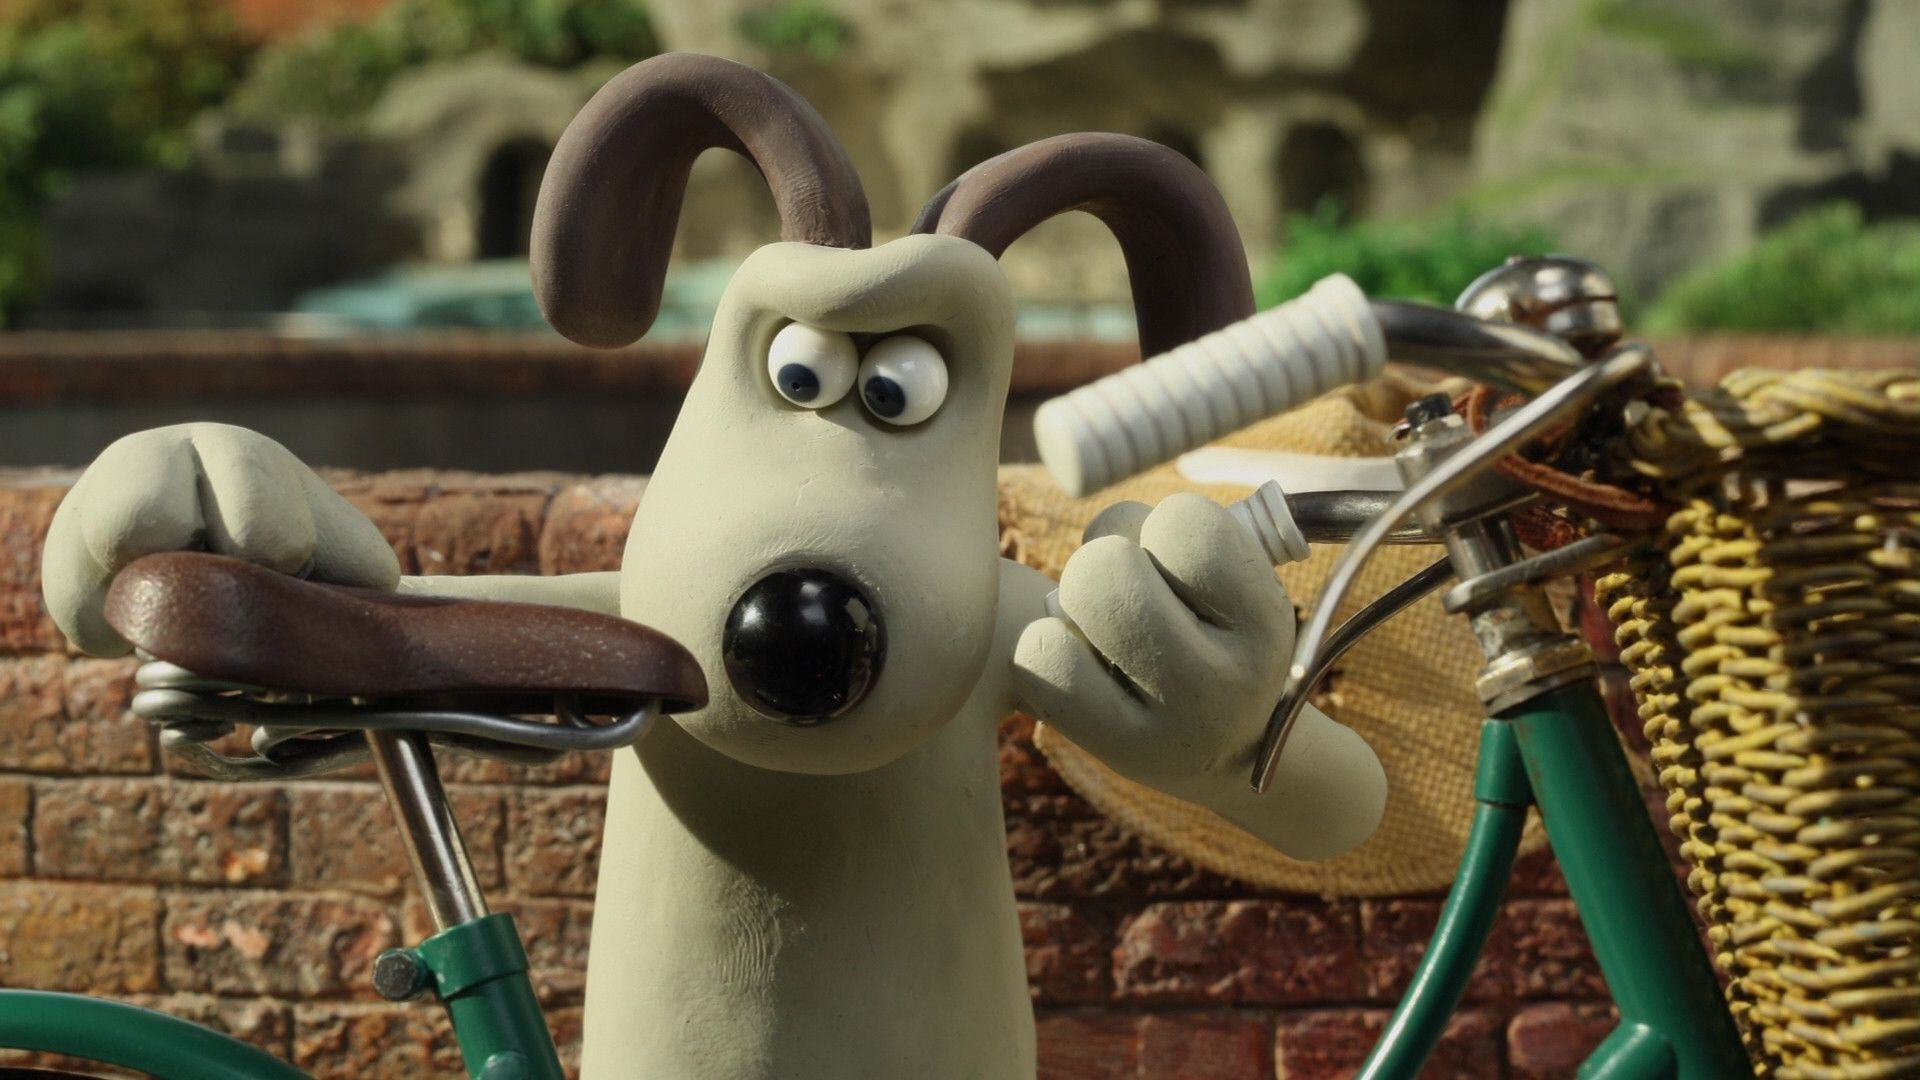 1920x1080 Pin by laika on Gromit | Wallace and gromit characters, Great movies, Wallace